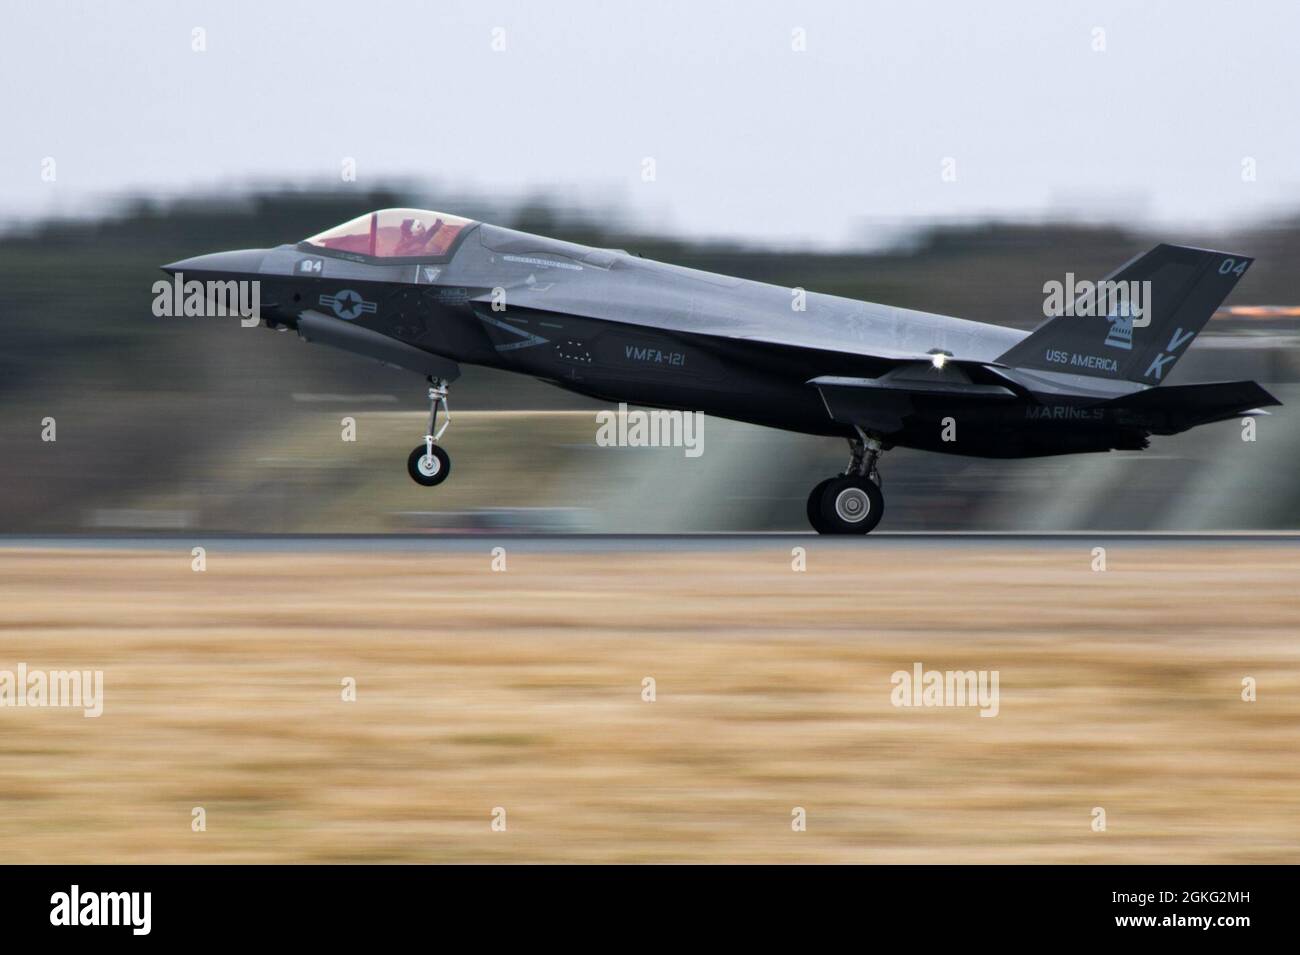 210413-N-EJ241-1051    MISAWA, Japan (April 13, 2021) – An F-35B Lightning II, assigned to the 'Green Knights' of Marine Fighter Attack Squadron (VMFA) 121, lands at Misawa Air Base. VMFA-121 is the first operational F-35 squadron in the U.S. military. Stock Photo